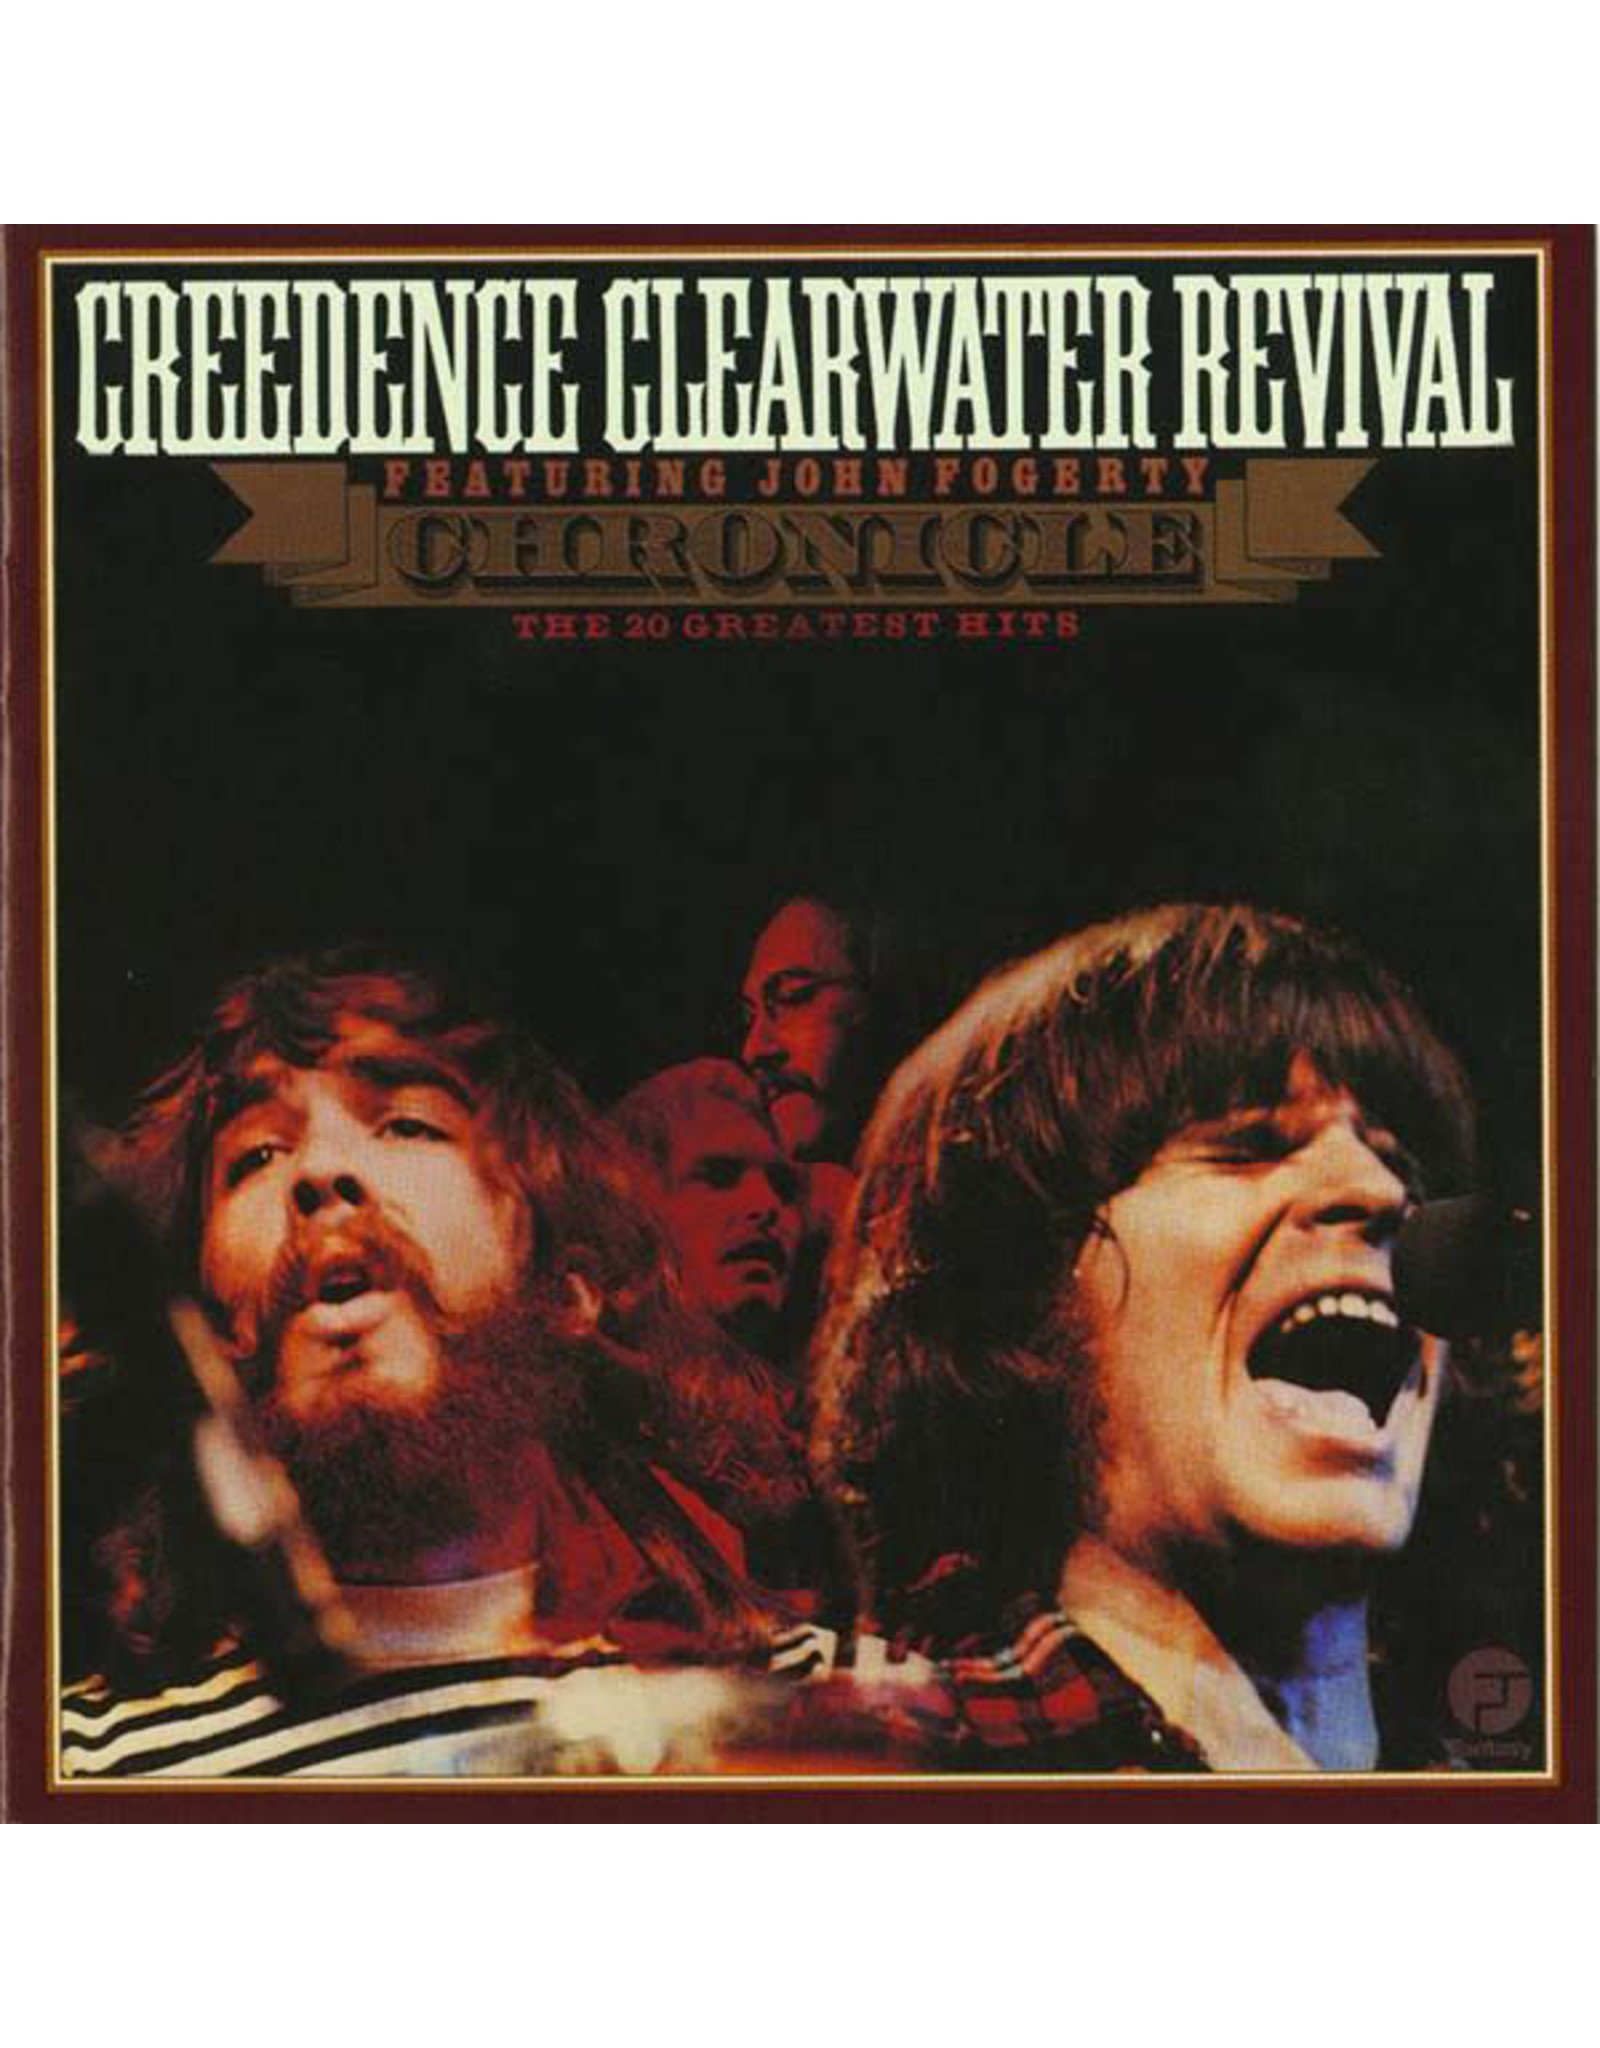 Creedence Clearwater Revival - Chronicle:  20 Greatest Hits